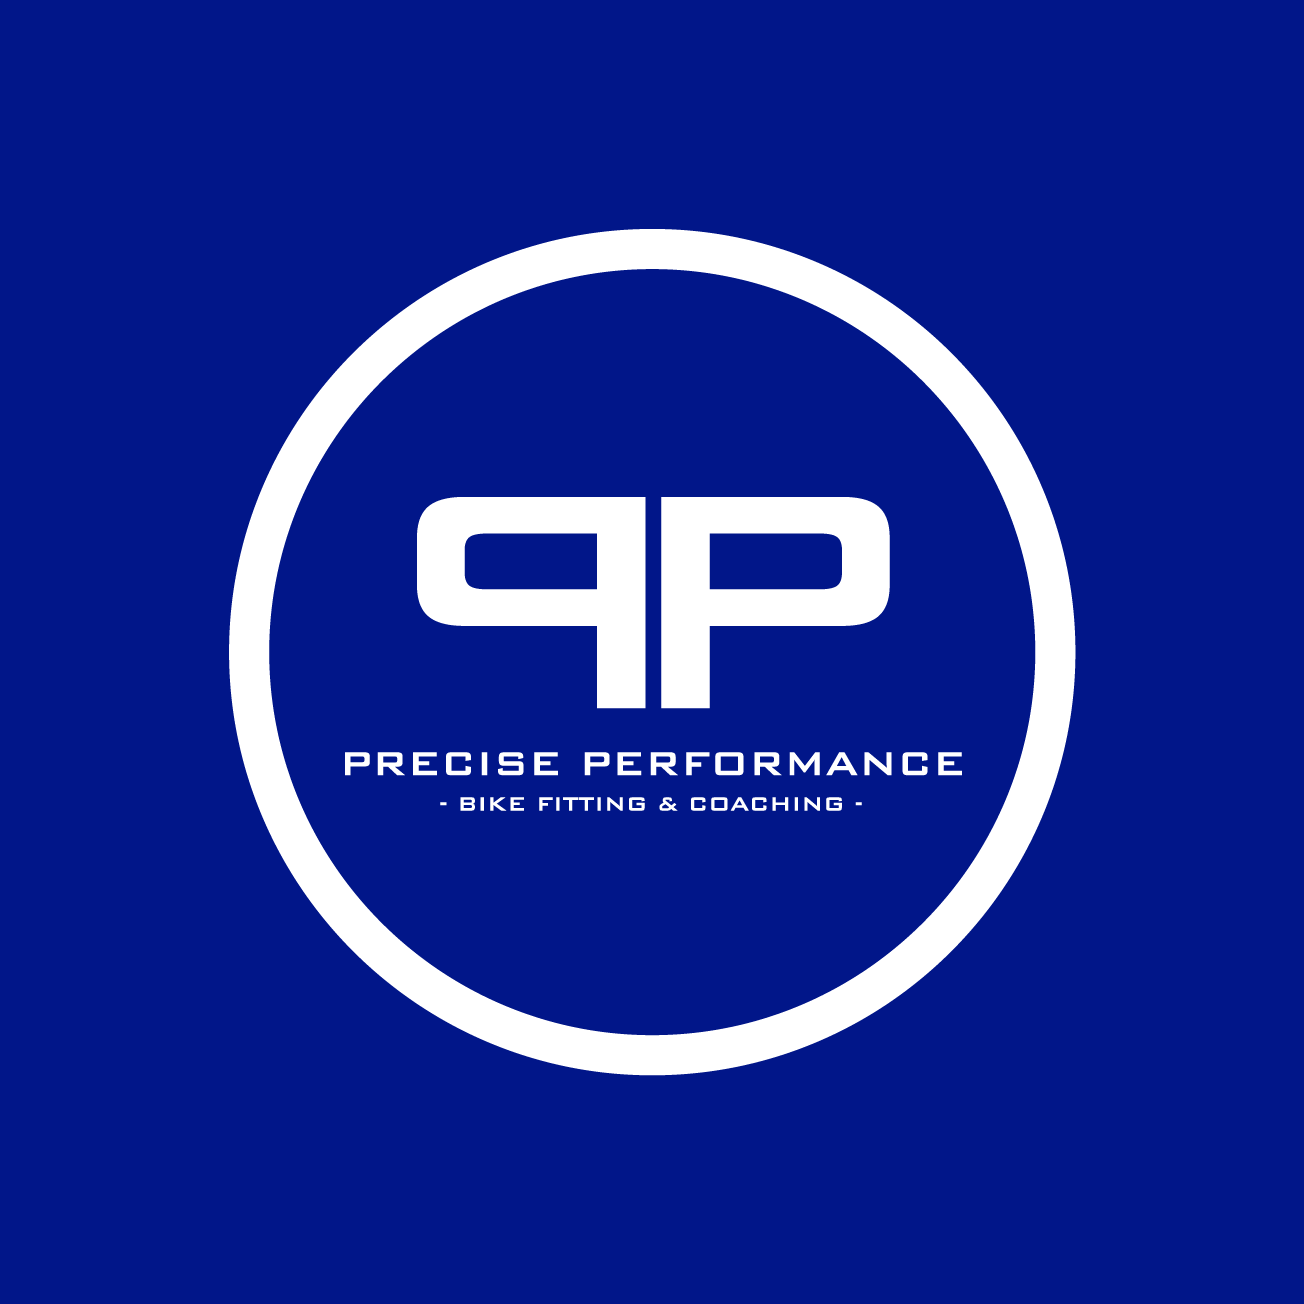 Club Image for PRECISE PERFORMANCE